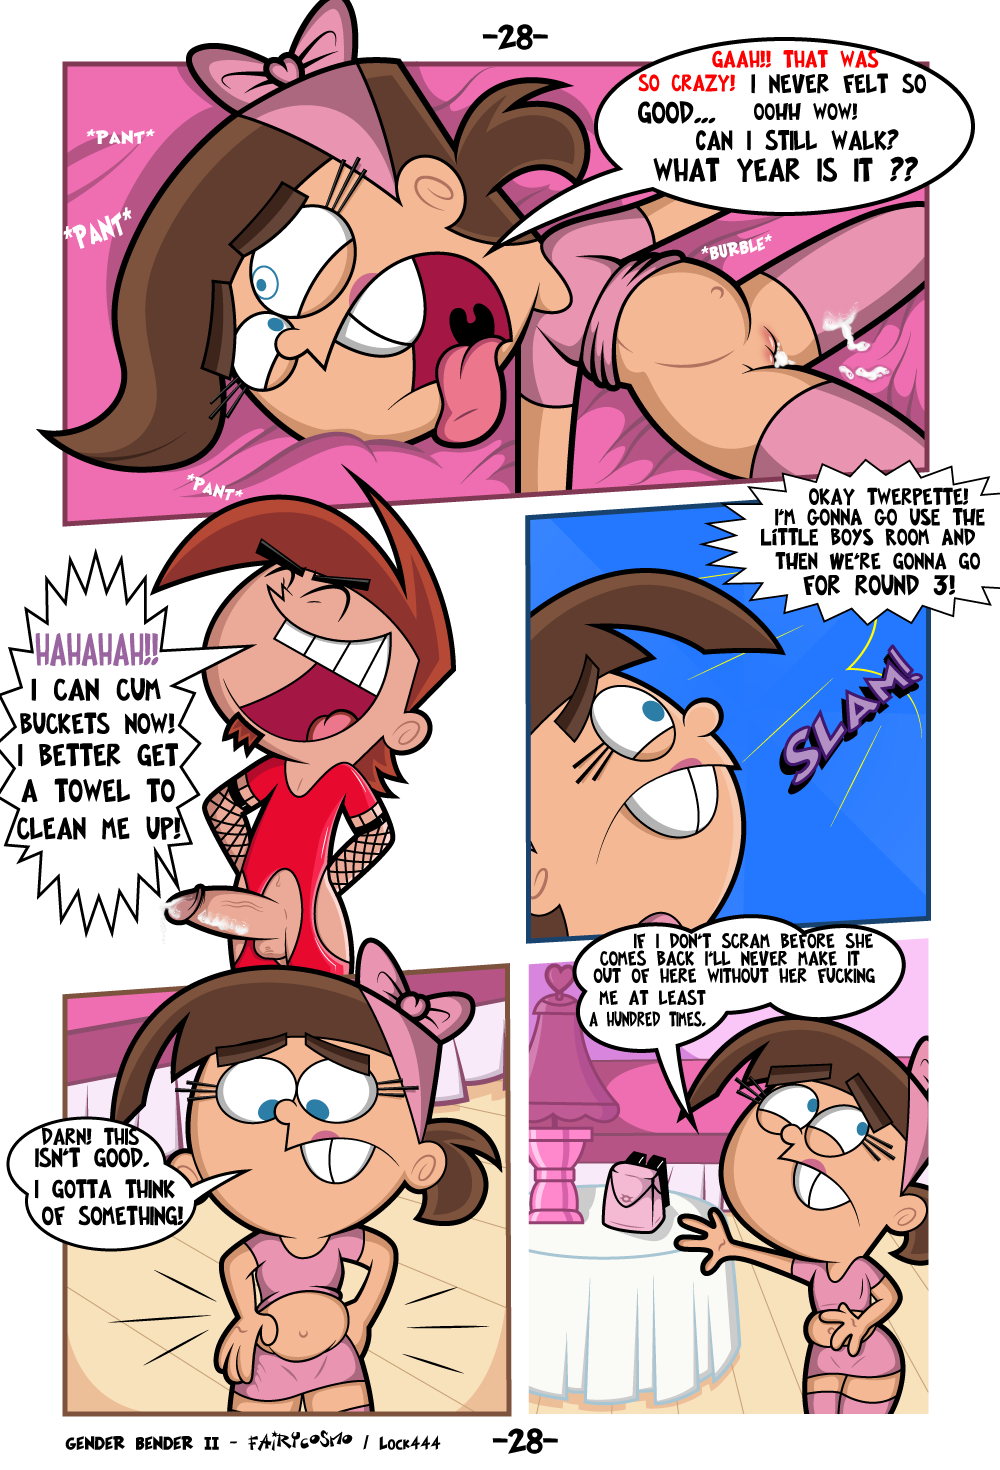 Porn fairly odd parents Very HOT XXX website compilations.